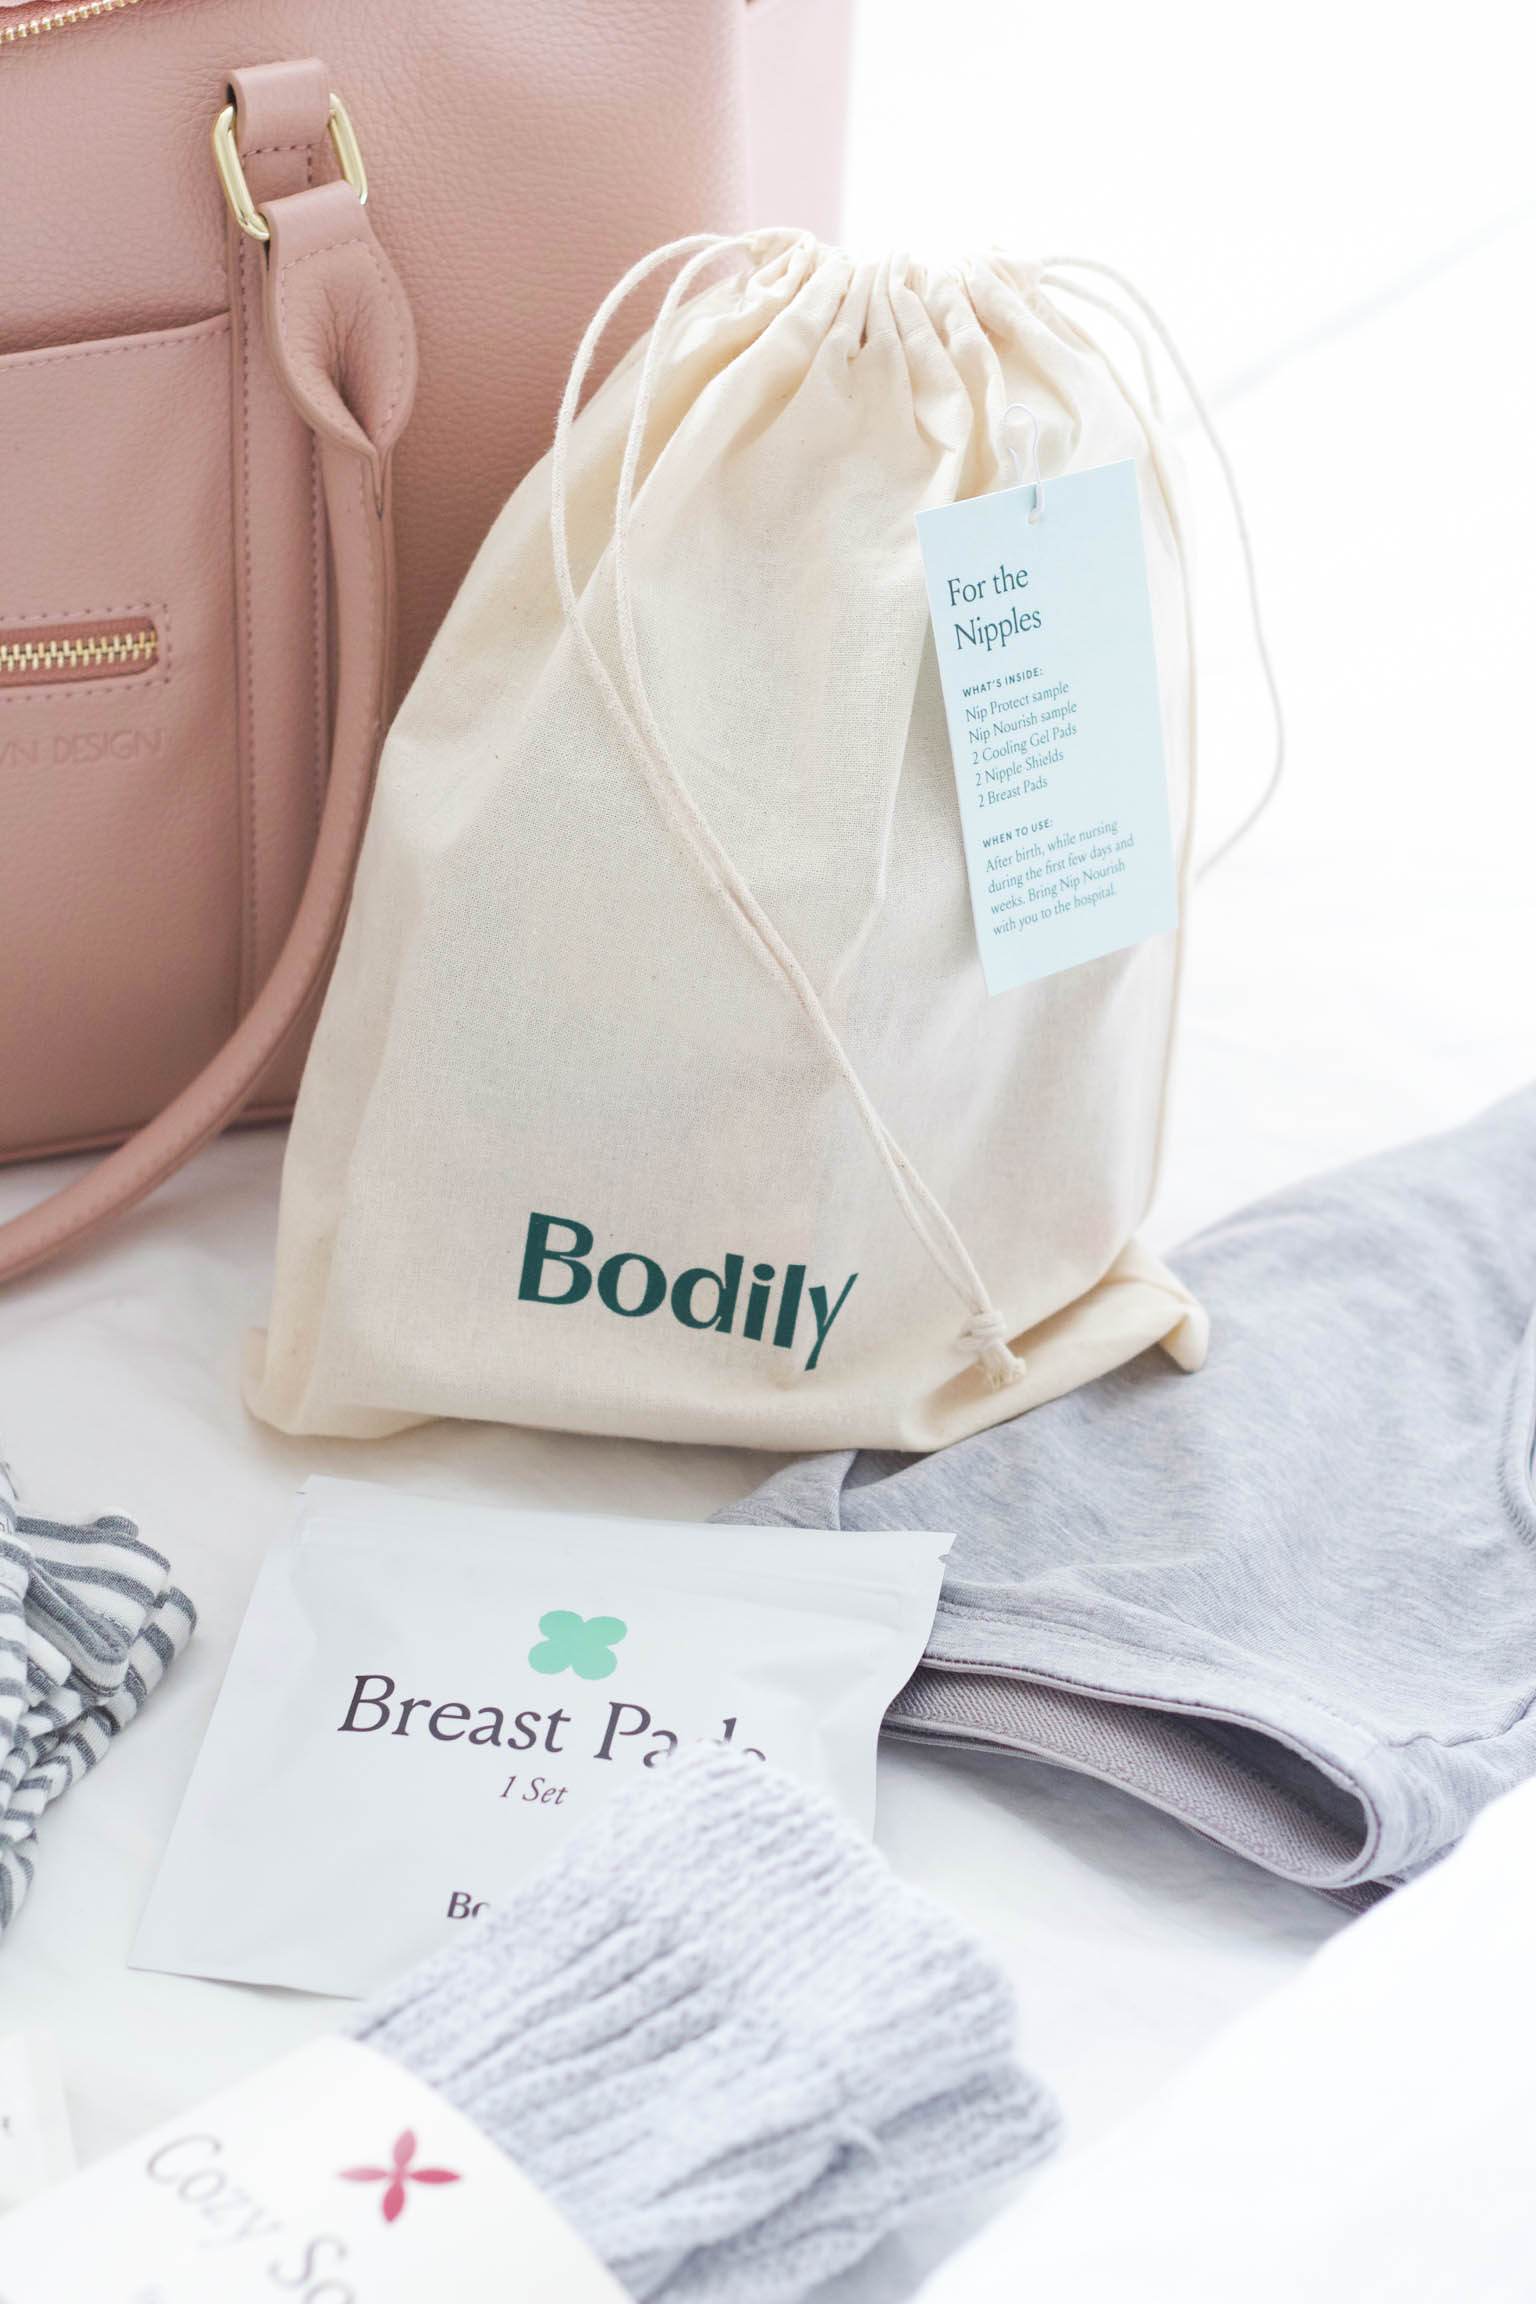 Labor and Delivery Essentials According to a Second-time Mom - Bambi & Co.